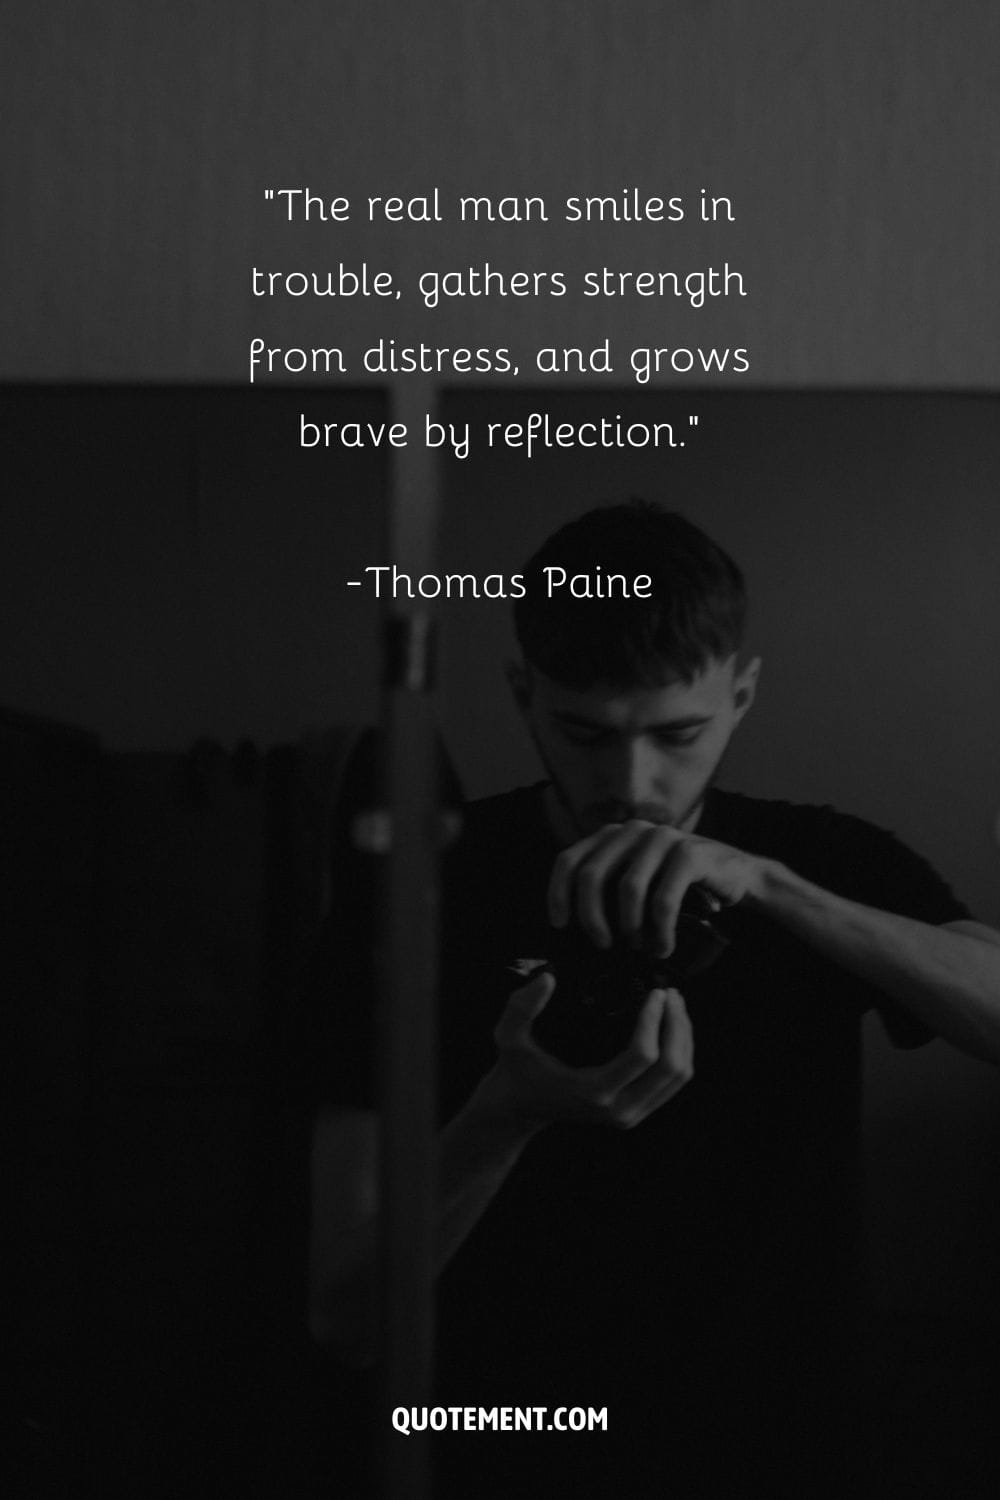 The real man smiles in trouble, gathers strength from distress, and grows brave by reflection. – Thomas Paine